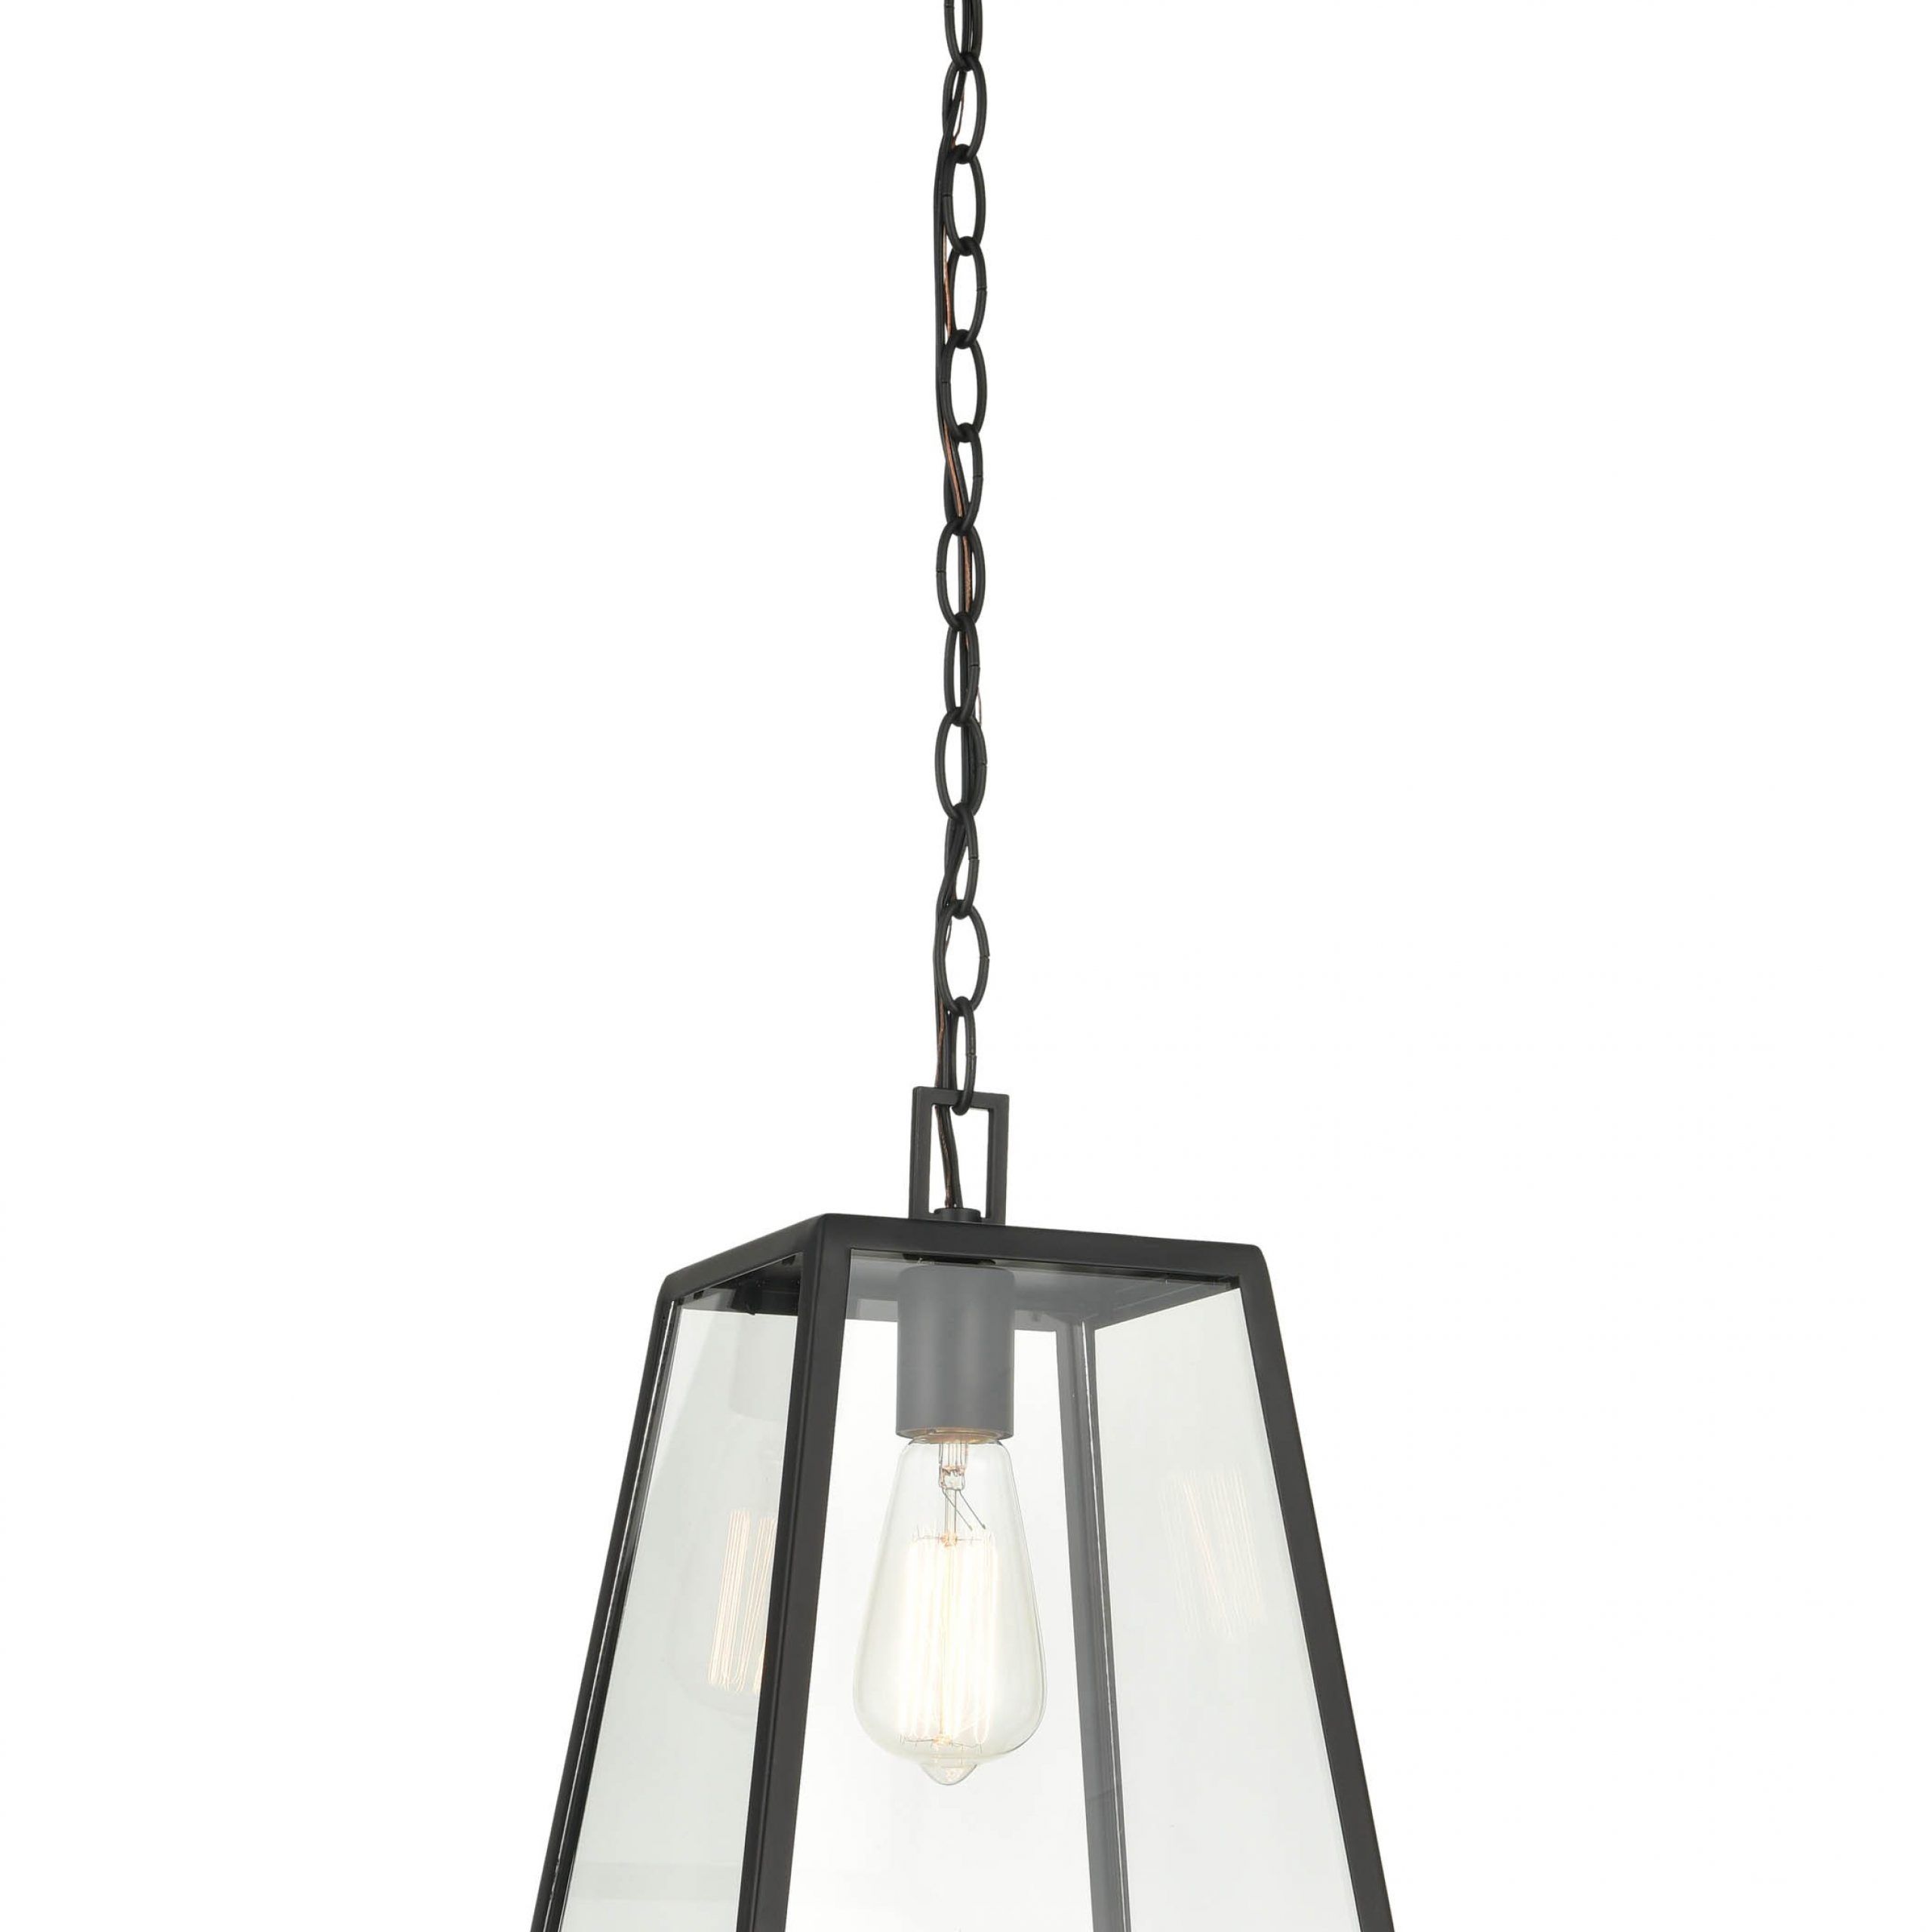 2020 Millennium Lighting Grant Powder Coat Black Transitional Clear Glass Lantern  Outdoor Pendant Light In The Pendant Lighting Department At Lowes Pertaining To Black Powder Coat Lantern Chandeliers (View 8 of 10)